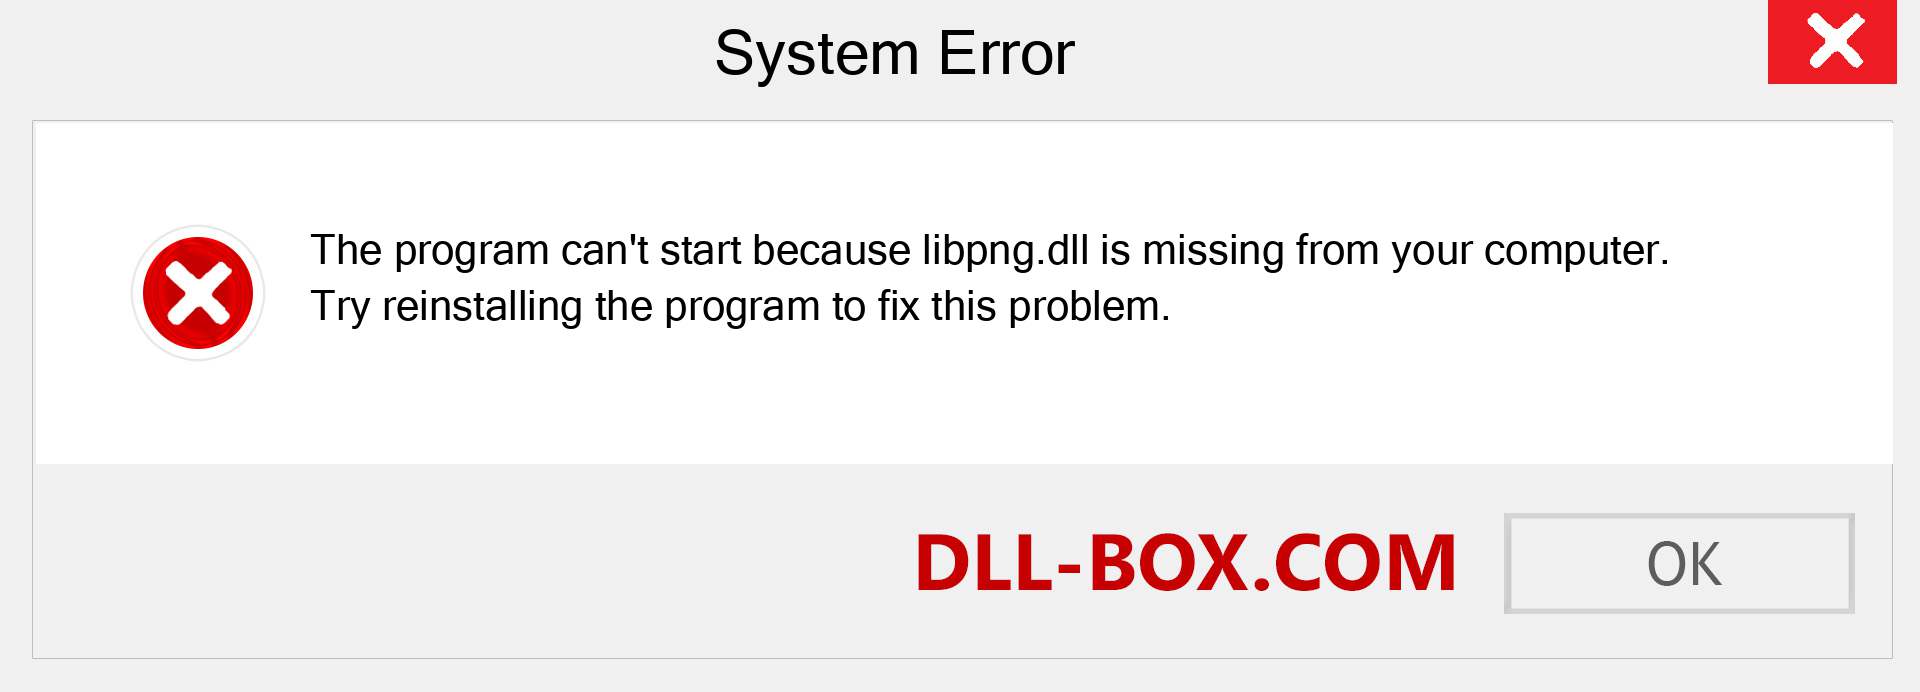  libpng.dll file is missing?. Download for Windows 7, 8, 10 - Fix  libpng dll Missing Error on Windows, photos, images